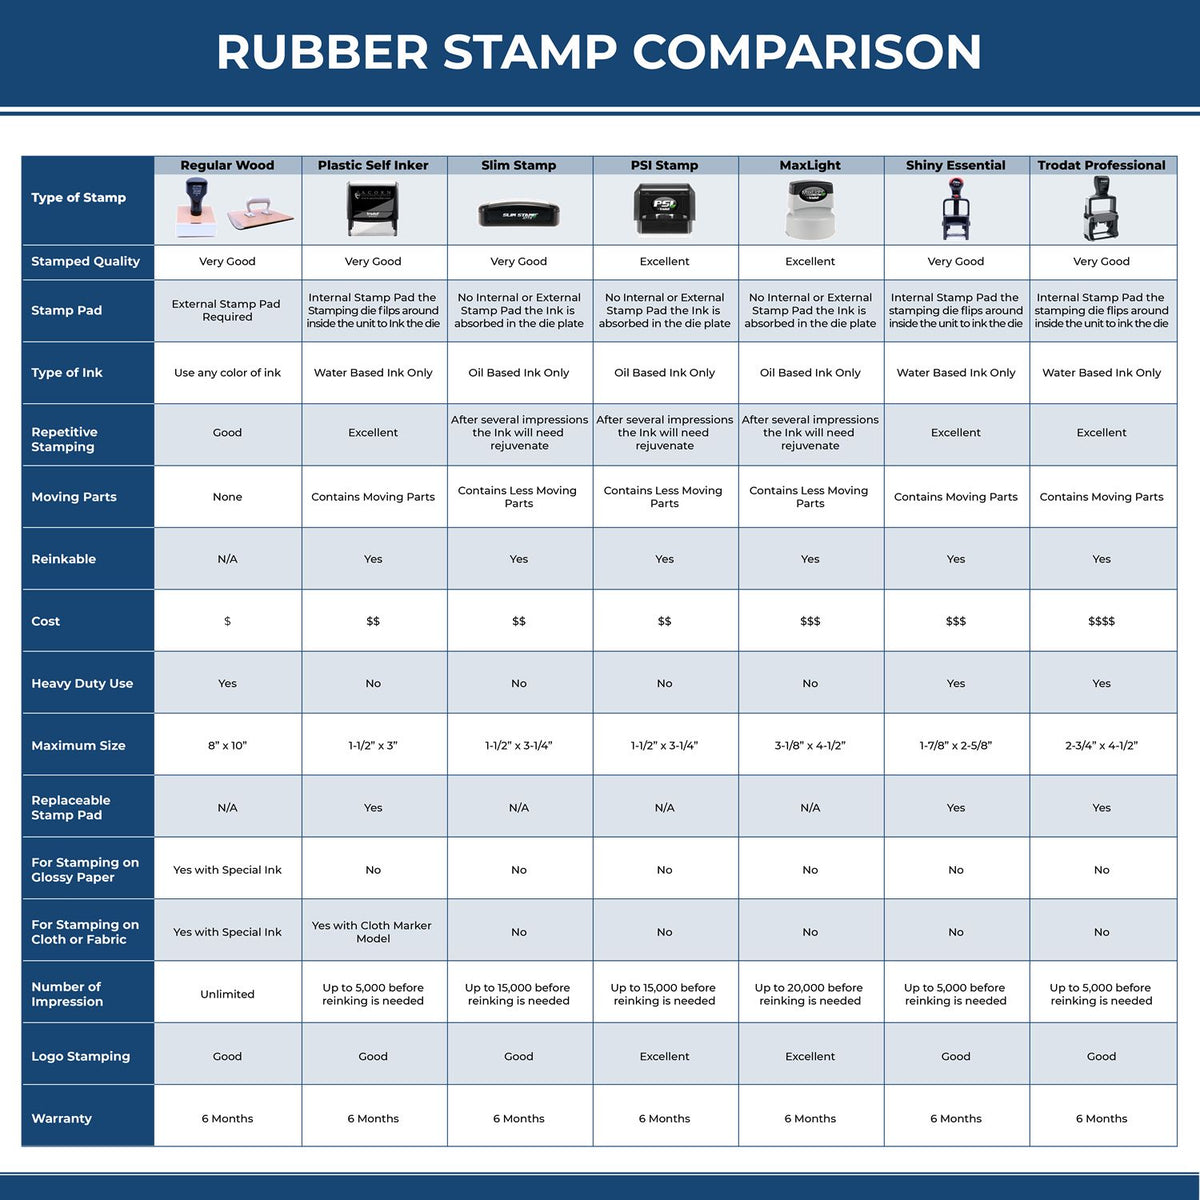 Large Self Inking Please Finish Stamp 4683S Rubber Stamp Comparison